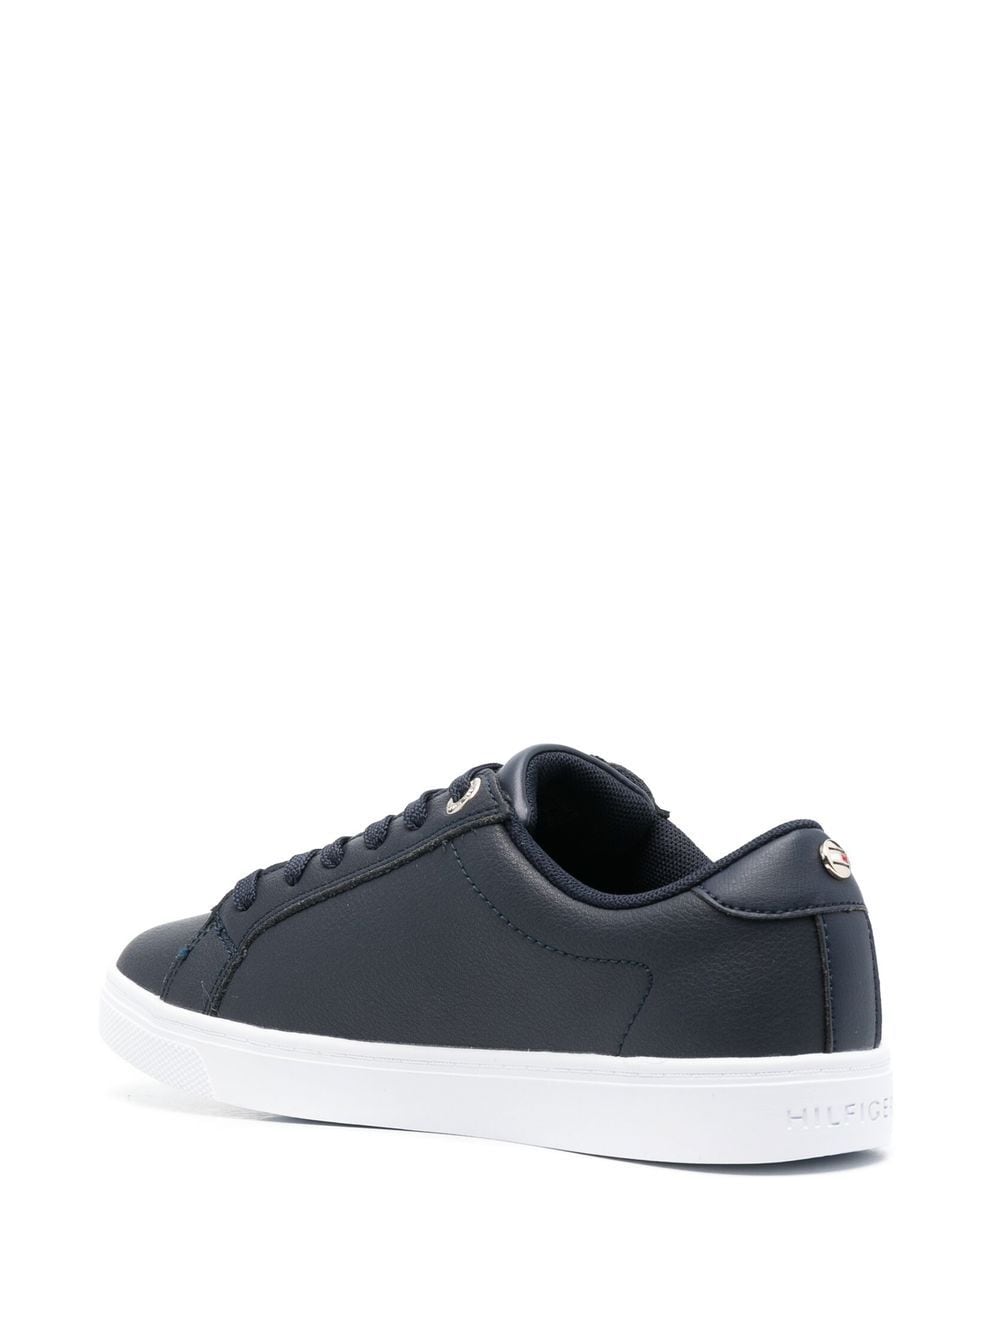 Tommy Sneakers Hilfiger - Stripes Essential lace-up Farfetch